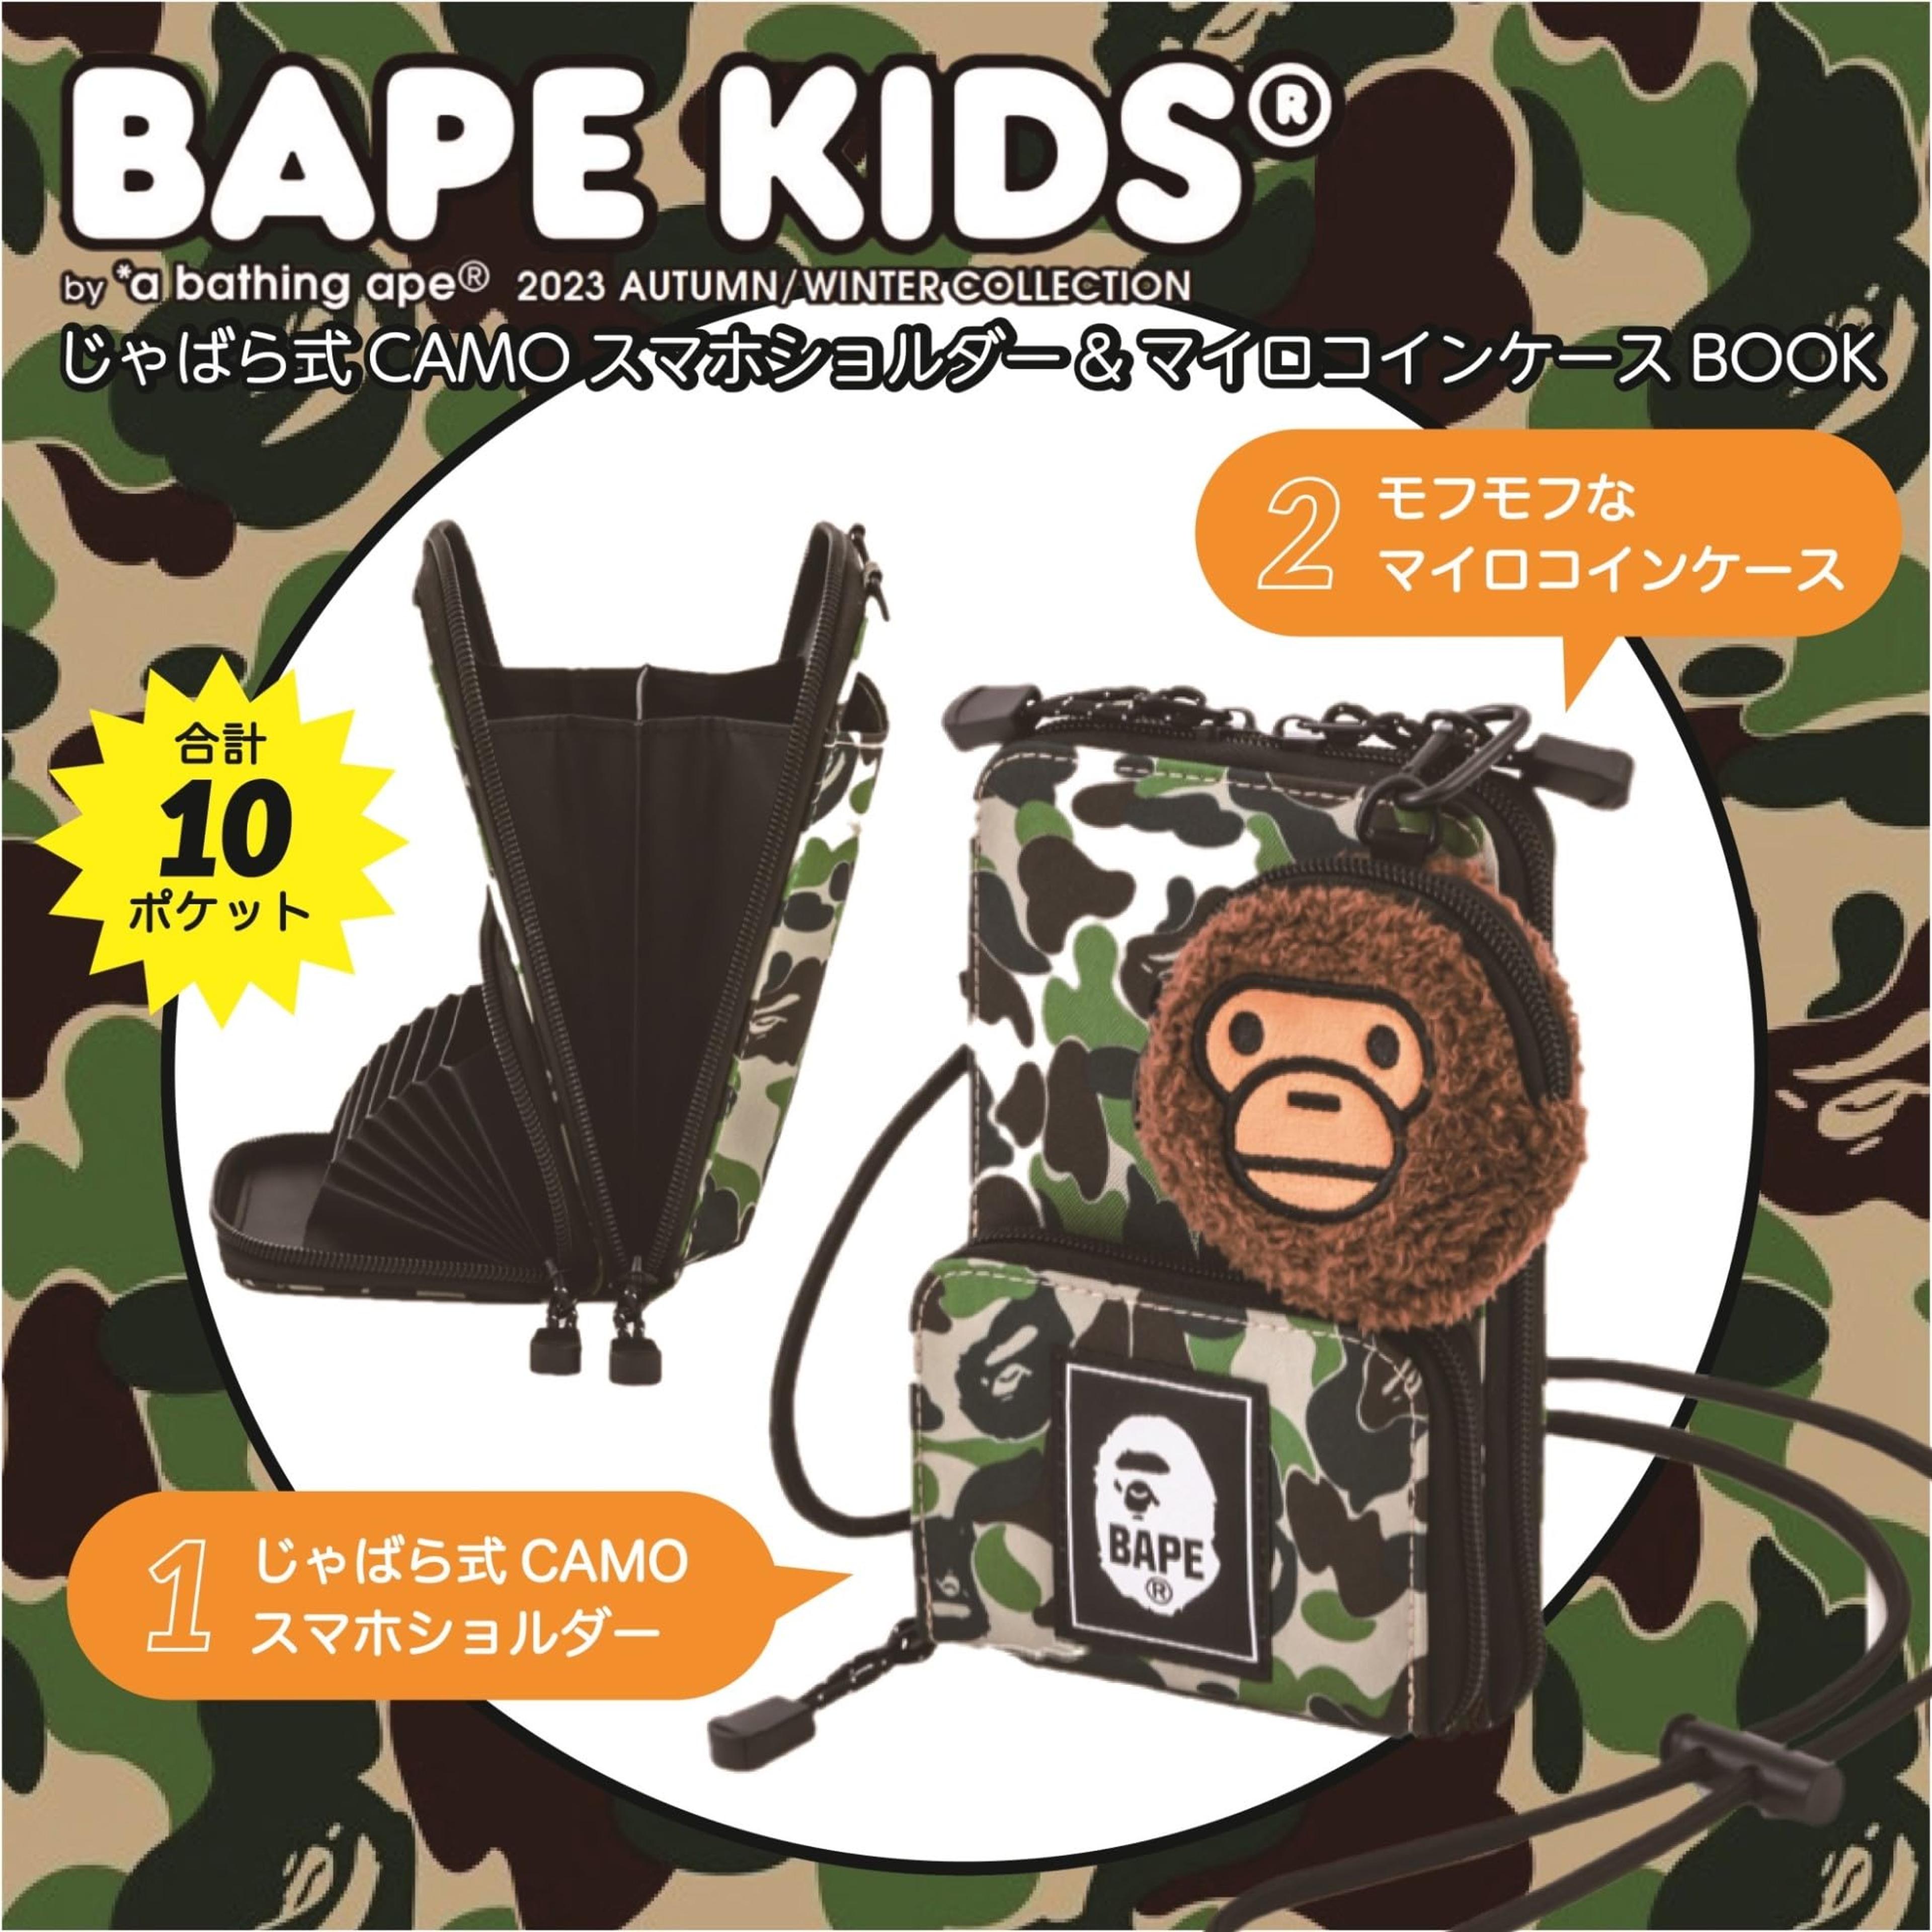 BAPE KIDS® by *a bathing ape® 2023 AUTUMN/WINTER COLLECTION PH